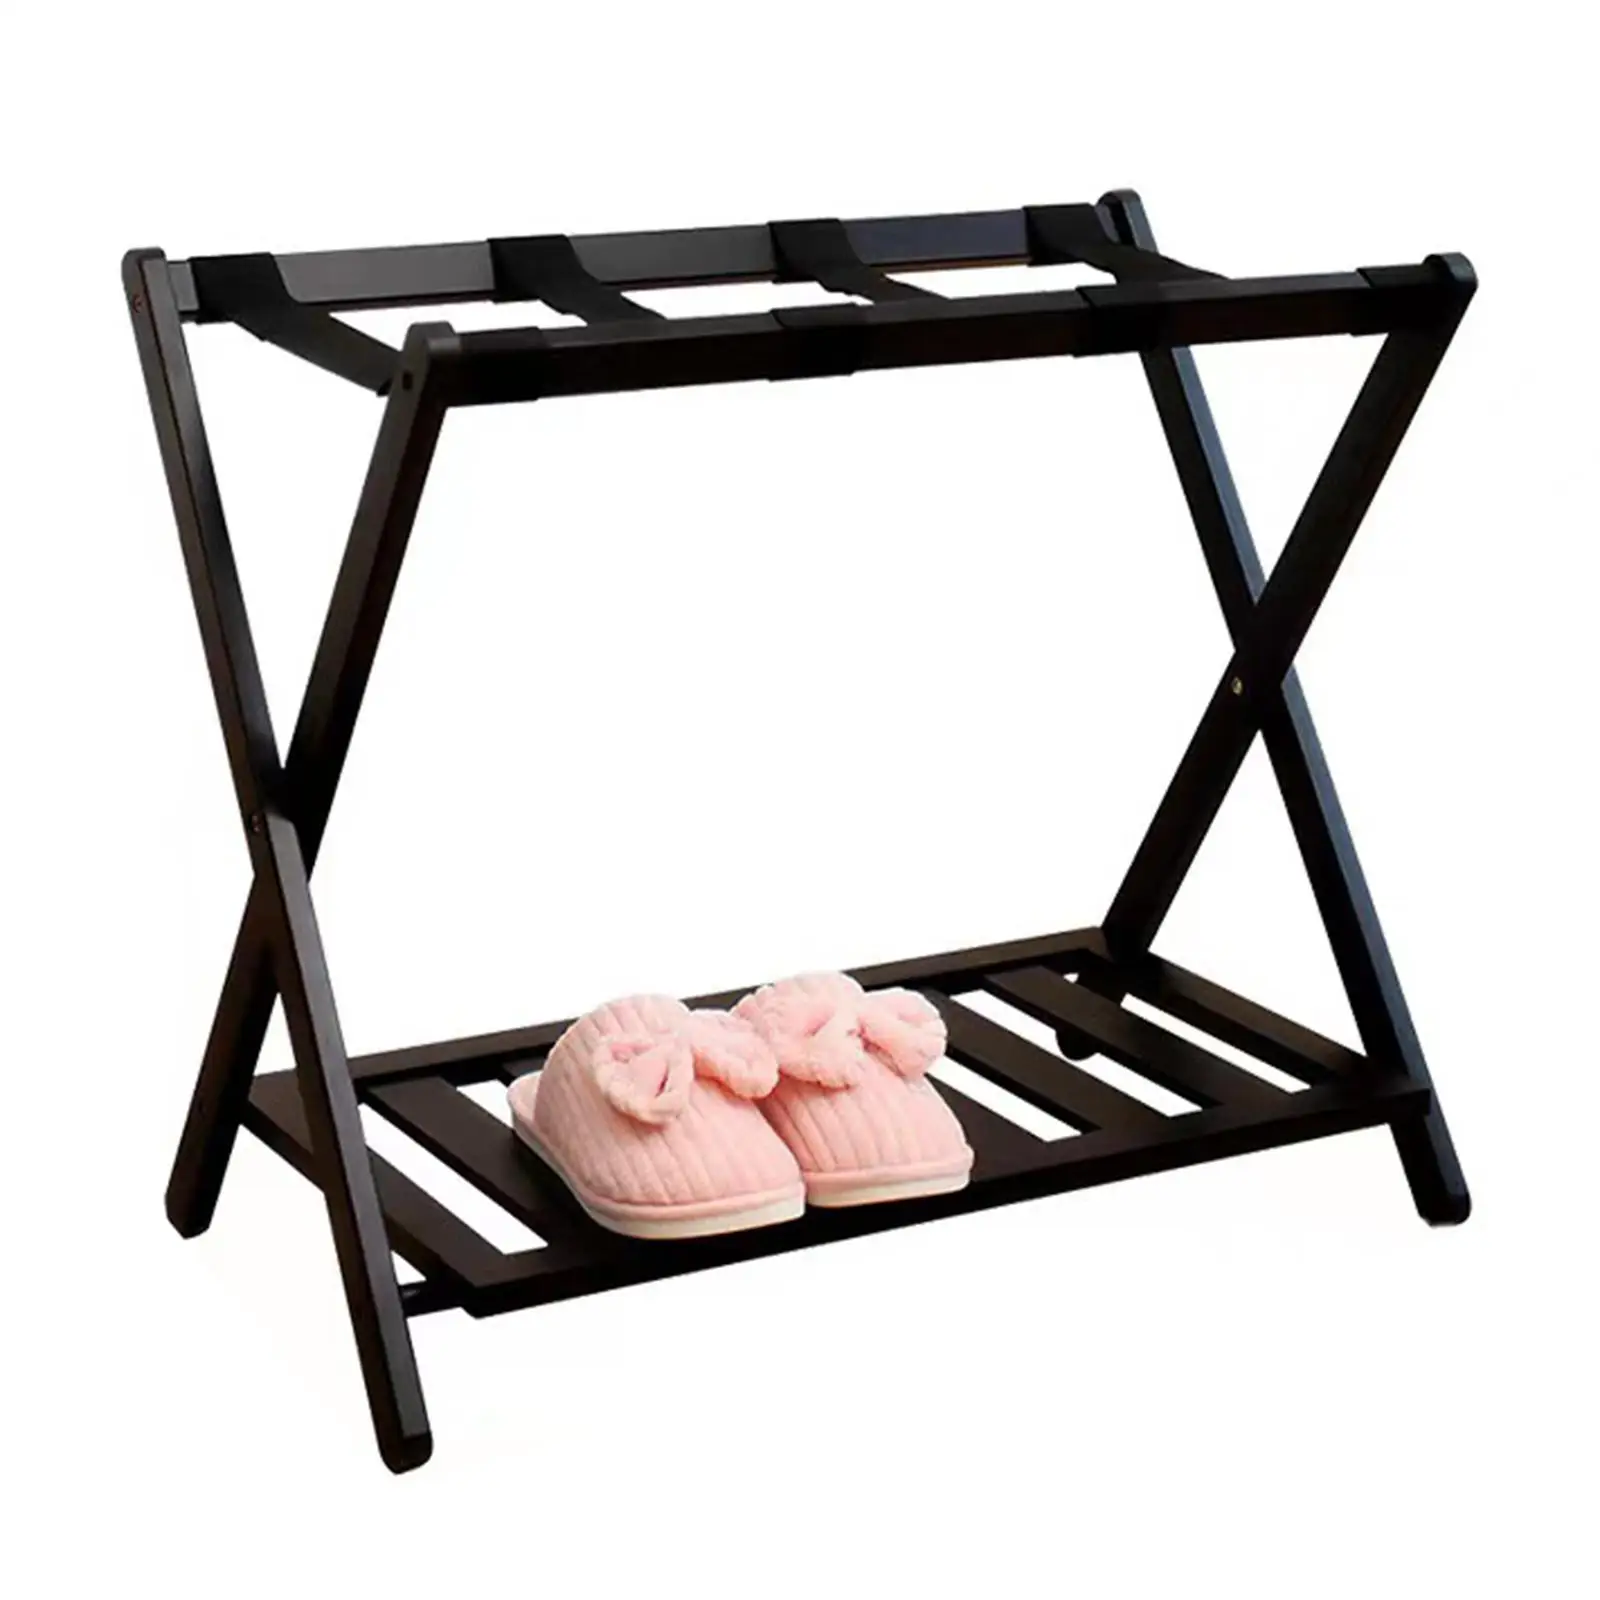 Luggage Rack Floor Standing with Shoes Shelf Suitcase Stand for Hotel Travel Home Heavy Duty Extra Wide Shelf Shoes Guest